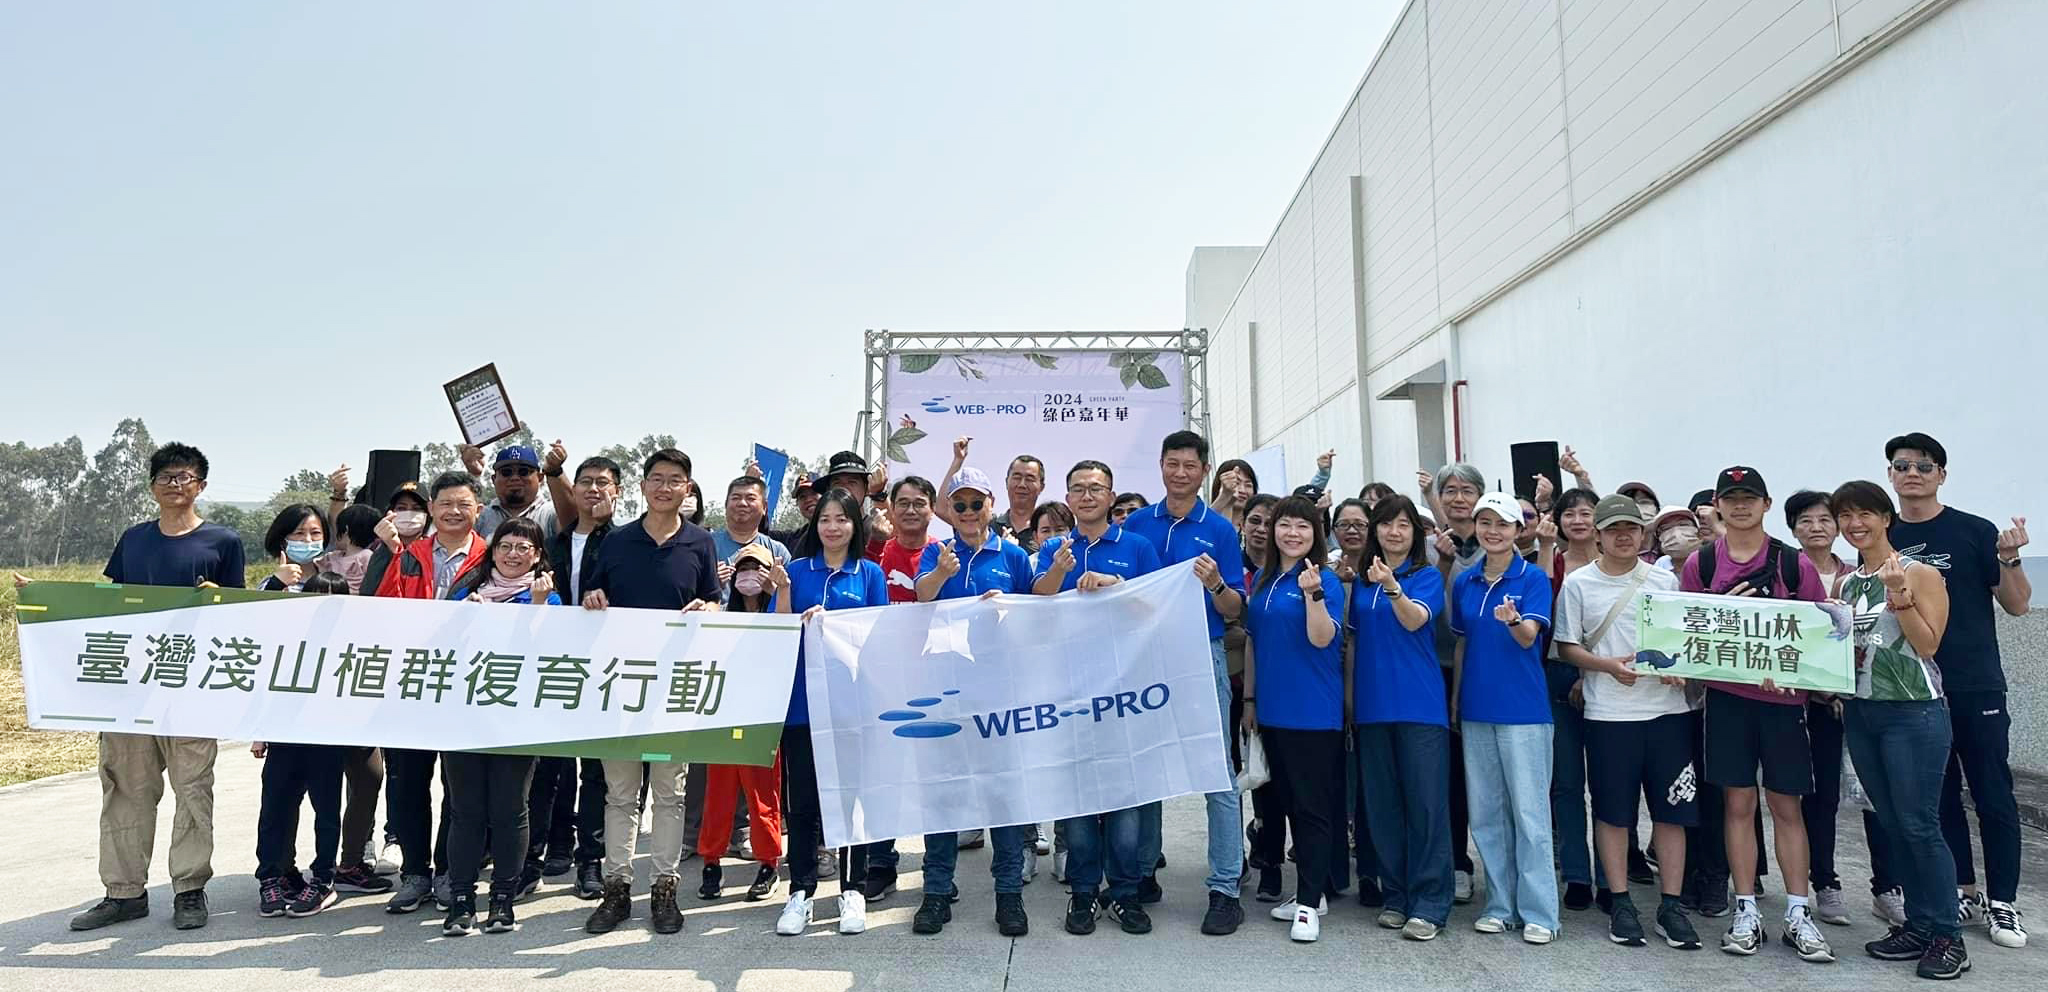 Web-Pro Corp establishes Tainan's first 'Tree Island' at Tree Valley Park, preserving native species